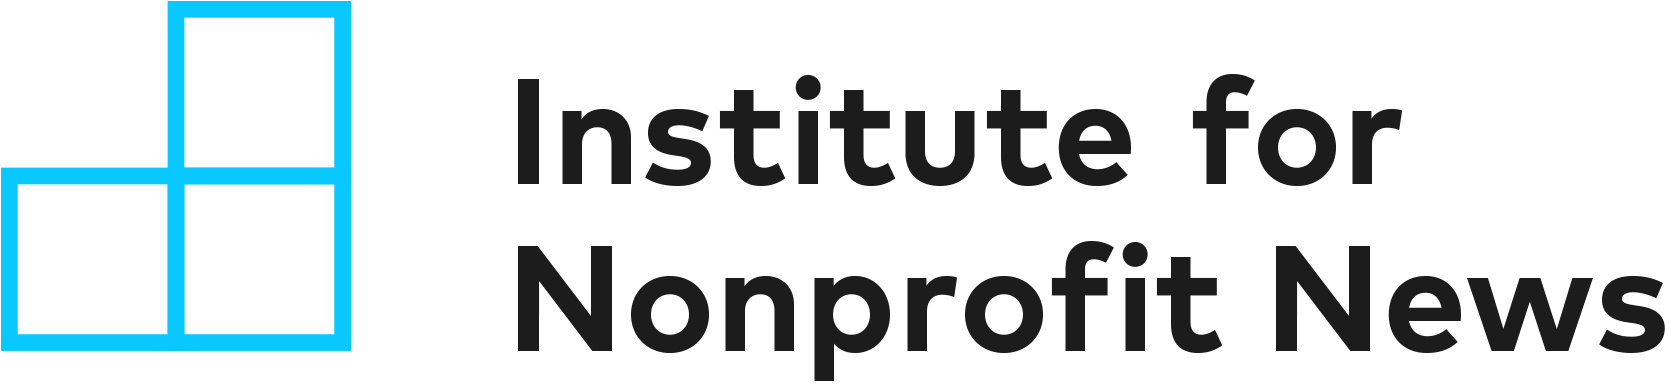 The Institute for Nonprofit News logo